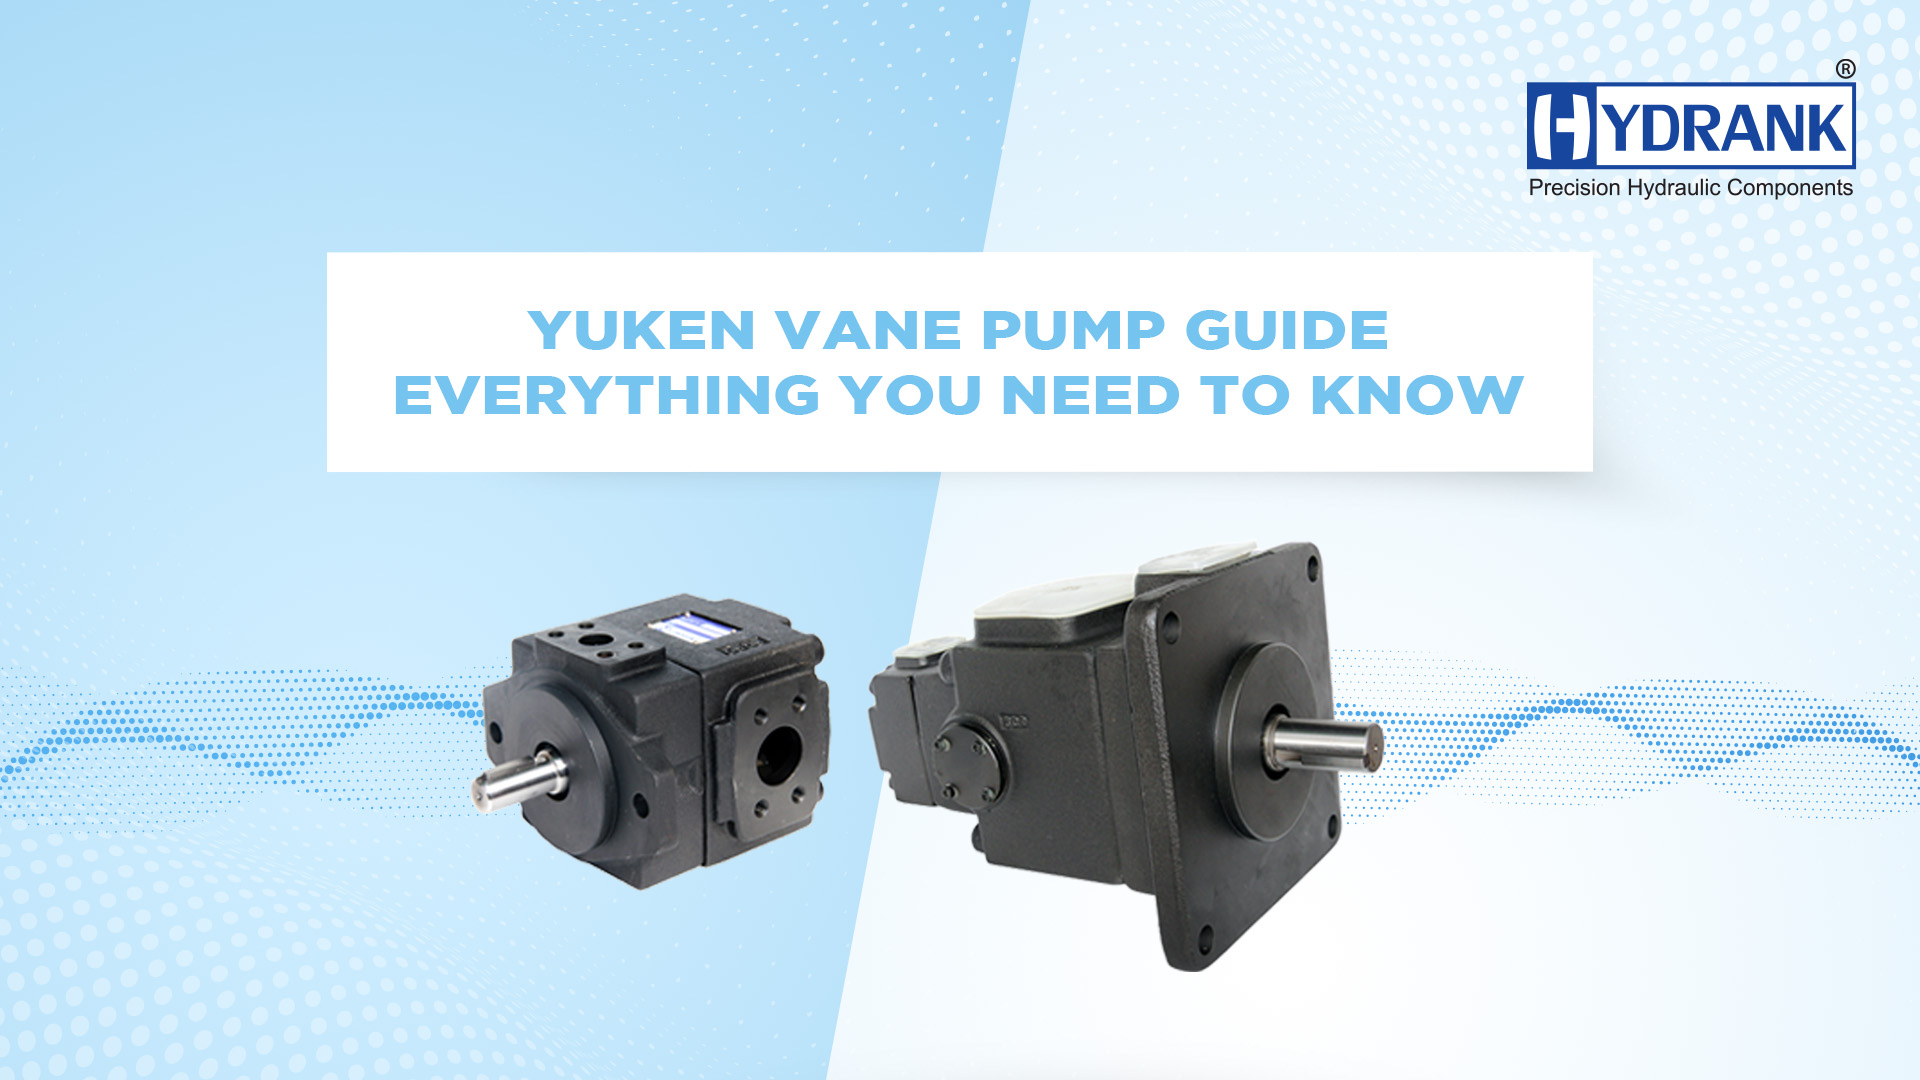 Yuken Vane Pump Guide: Everything You Need to Know